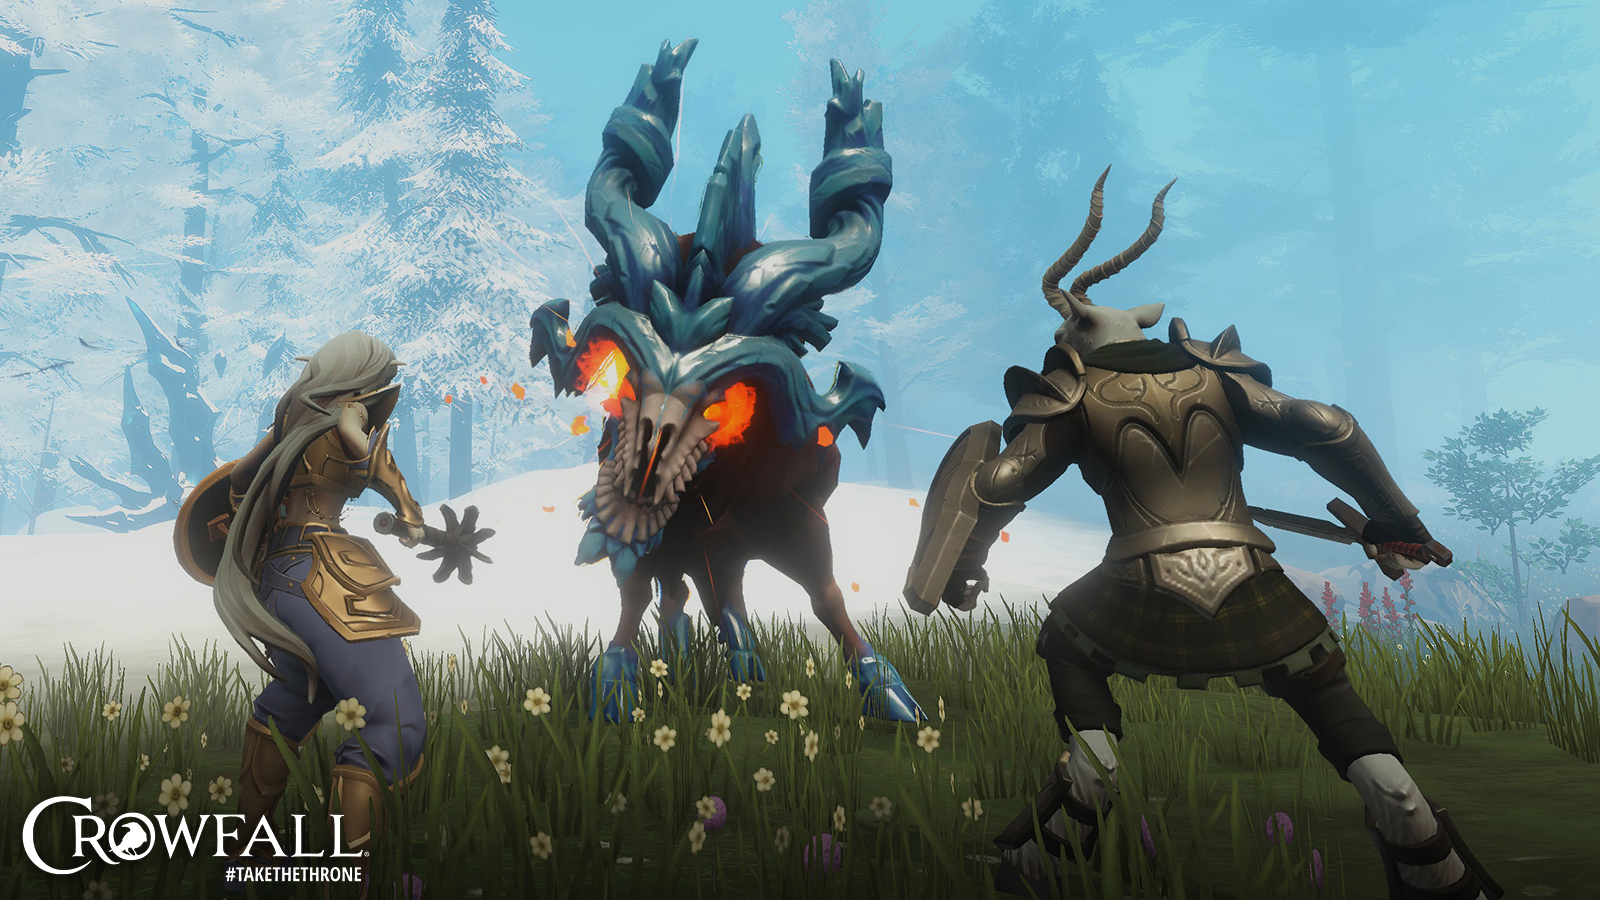 Interview Crowfall S Freemium Update Small Scale Pvp New Players And The Future Of The Game Massively Overpowered